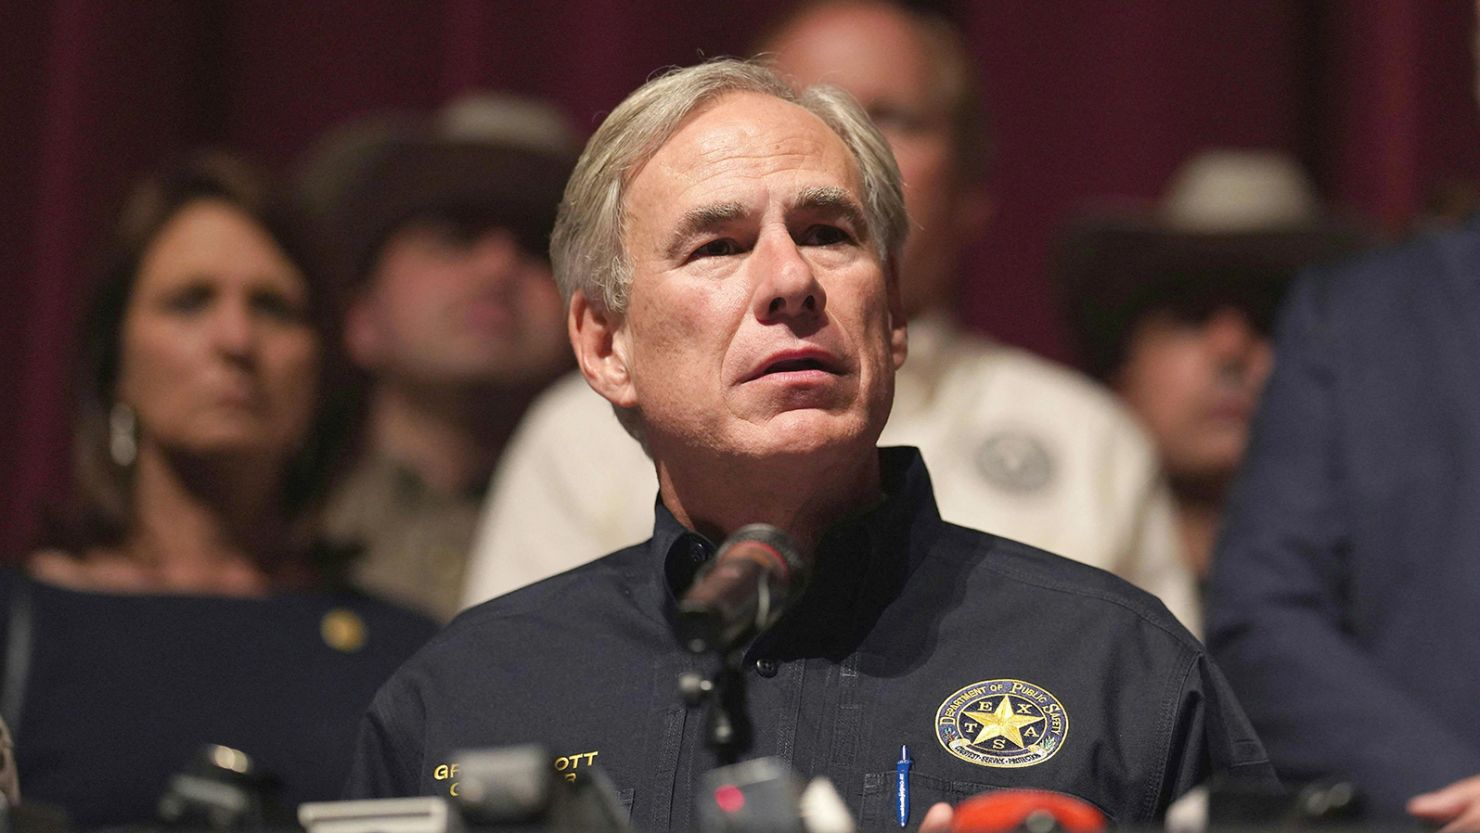 Texas Gov. Greg Abbott at a news conference on Wednesday.